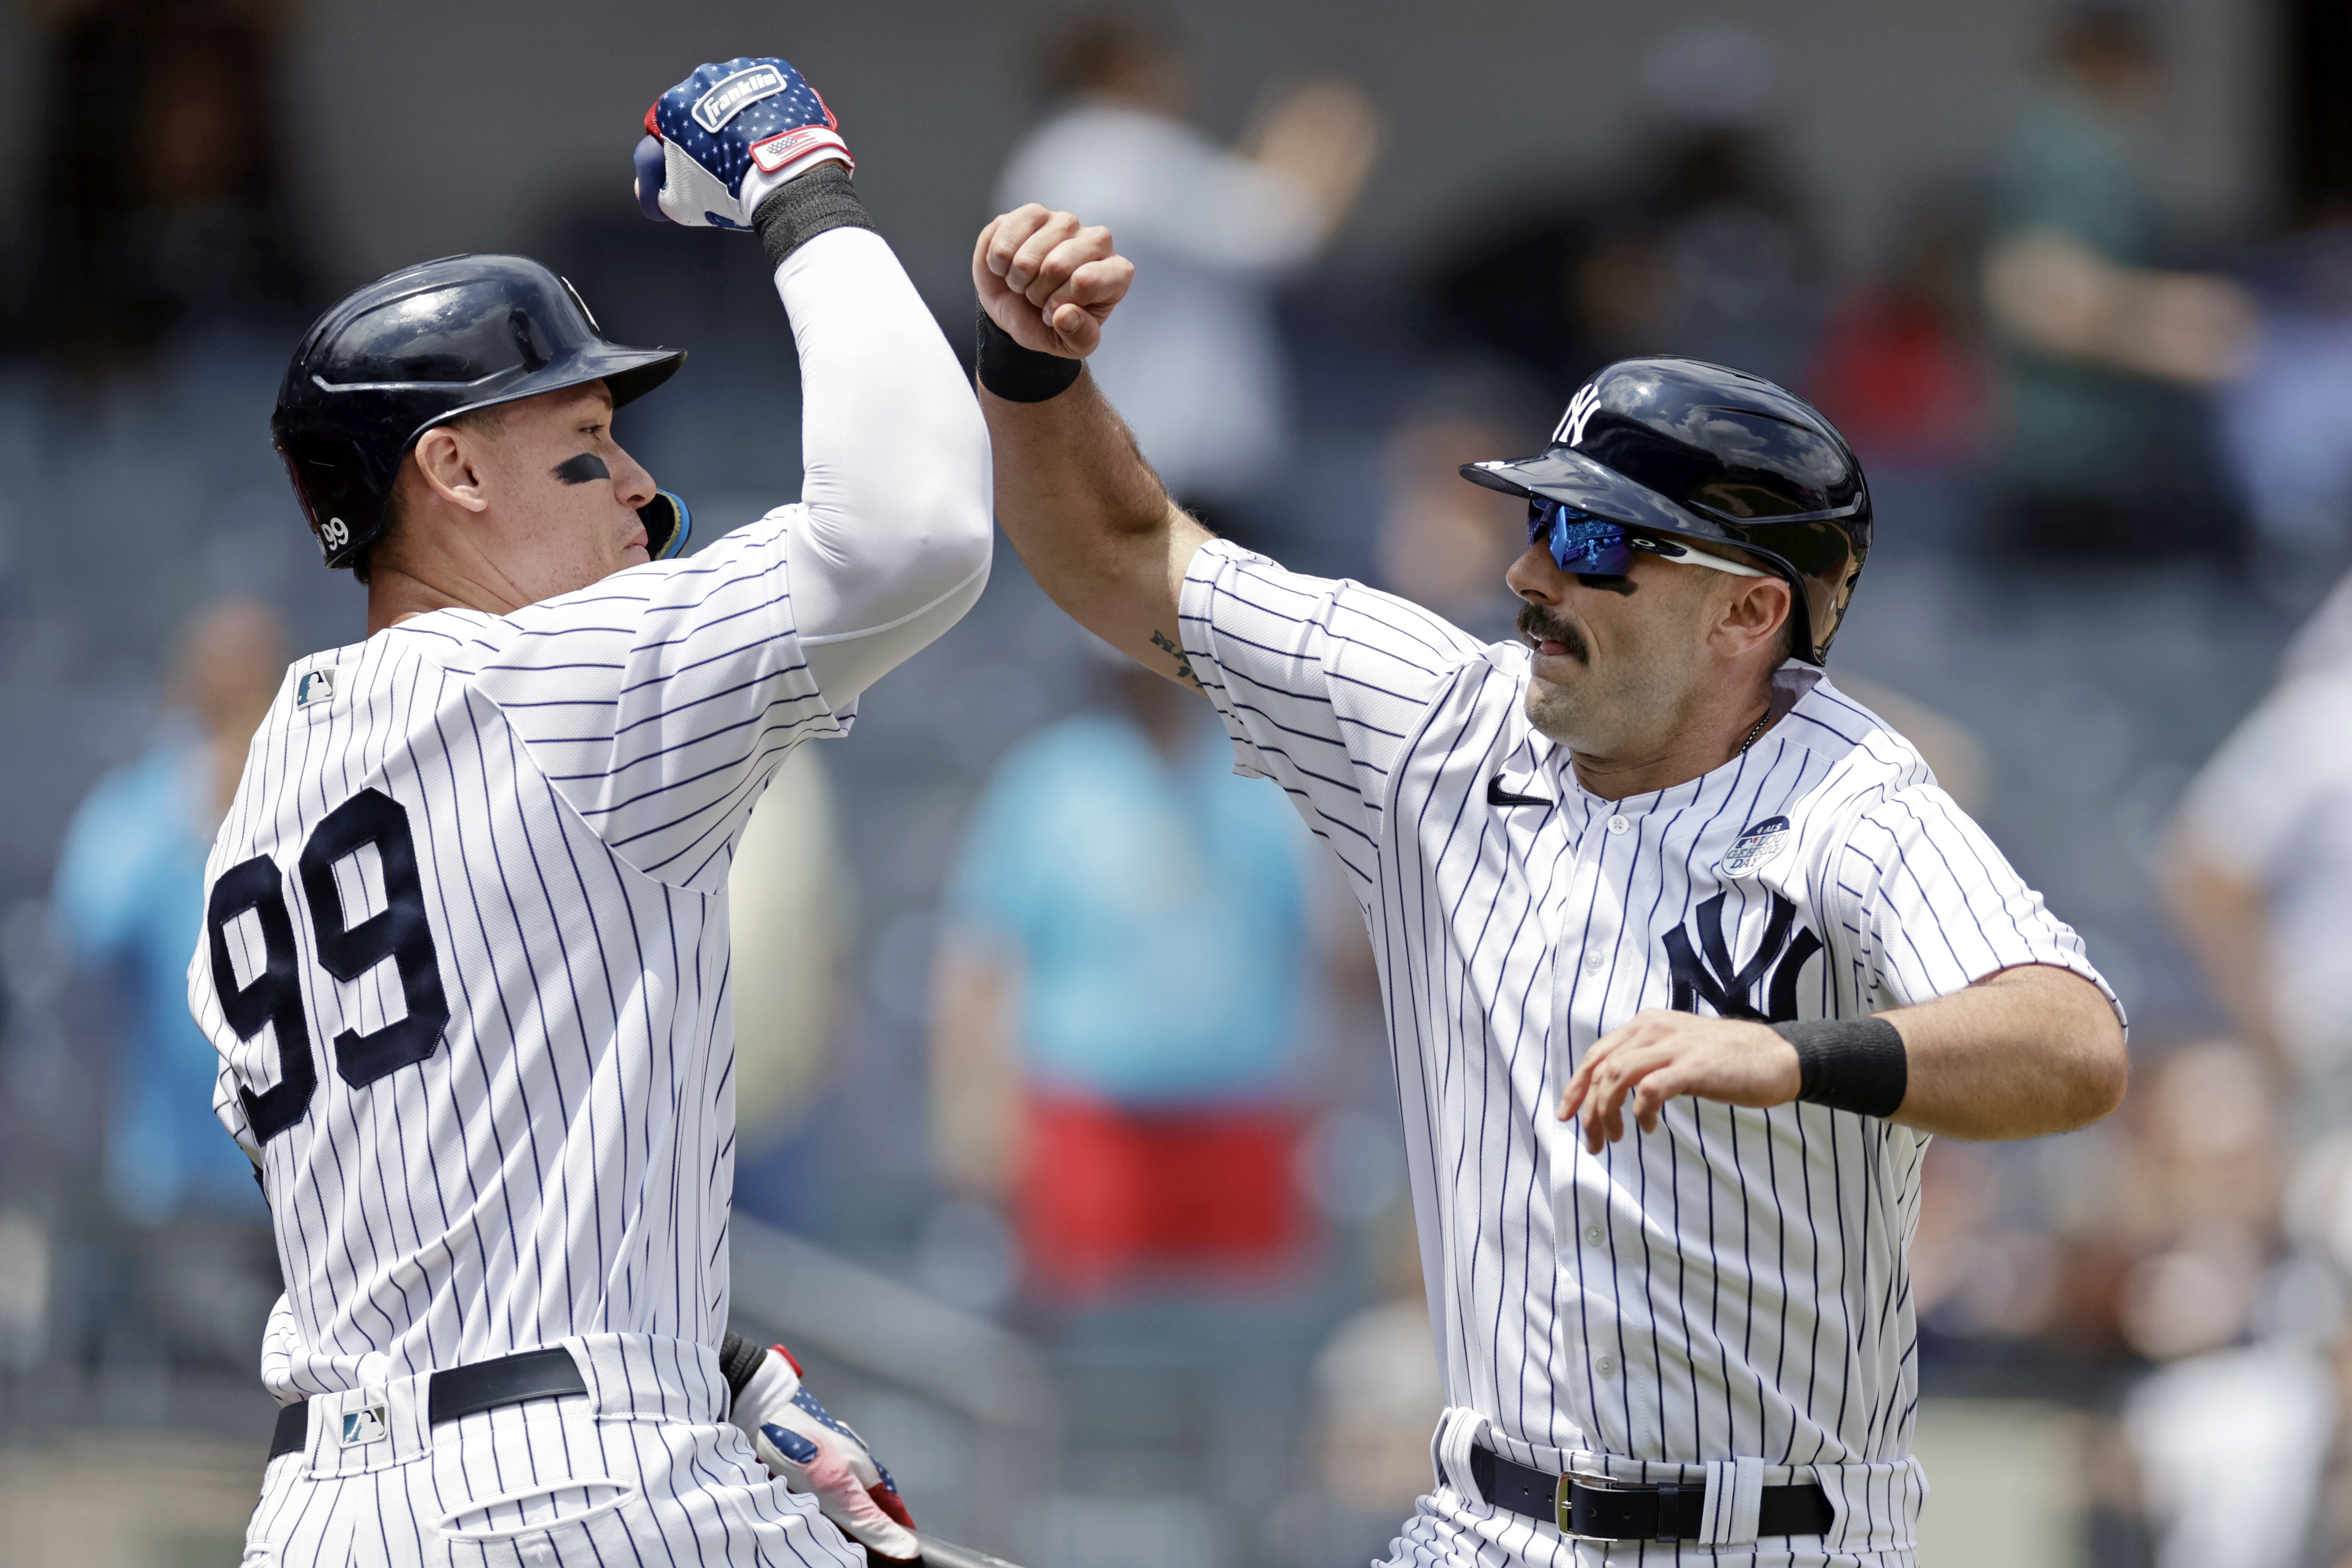 How to Watch the Yankees vs. Tigers Game: Streaming & TV Info